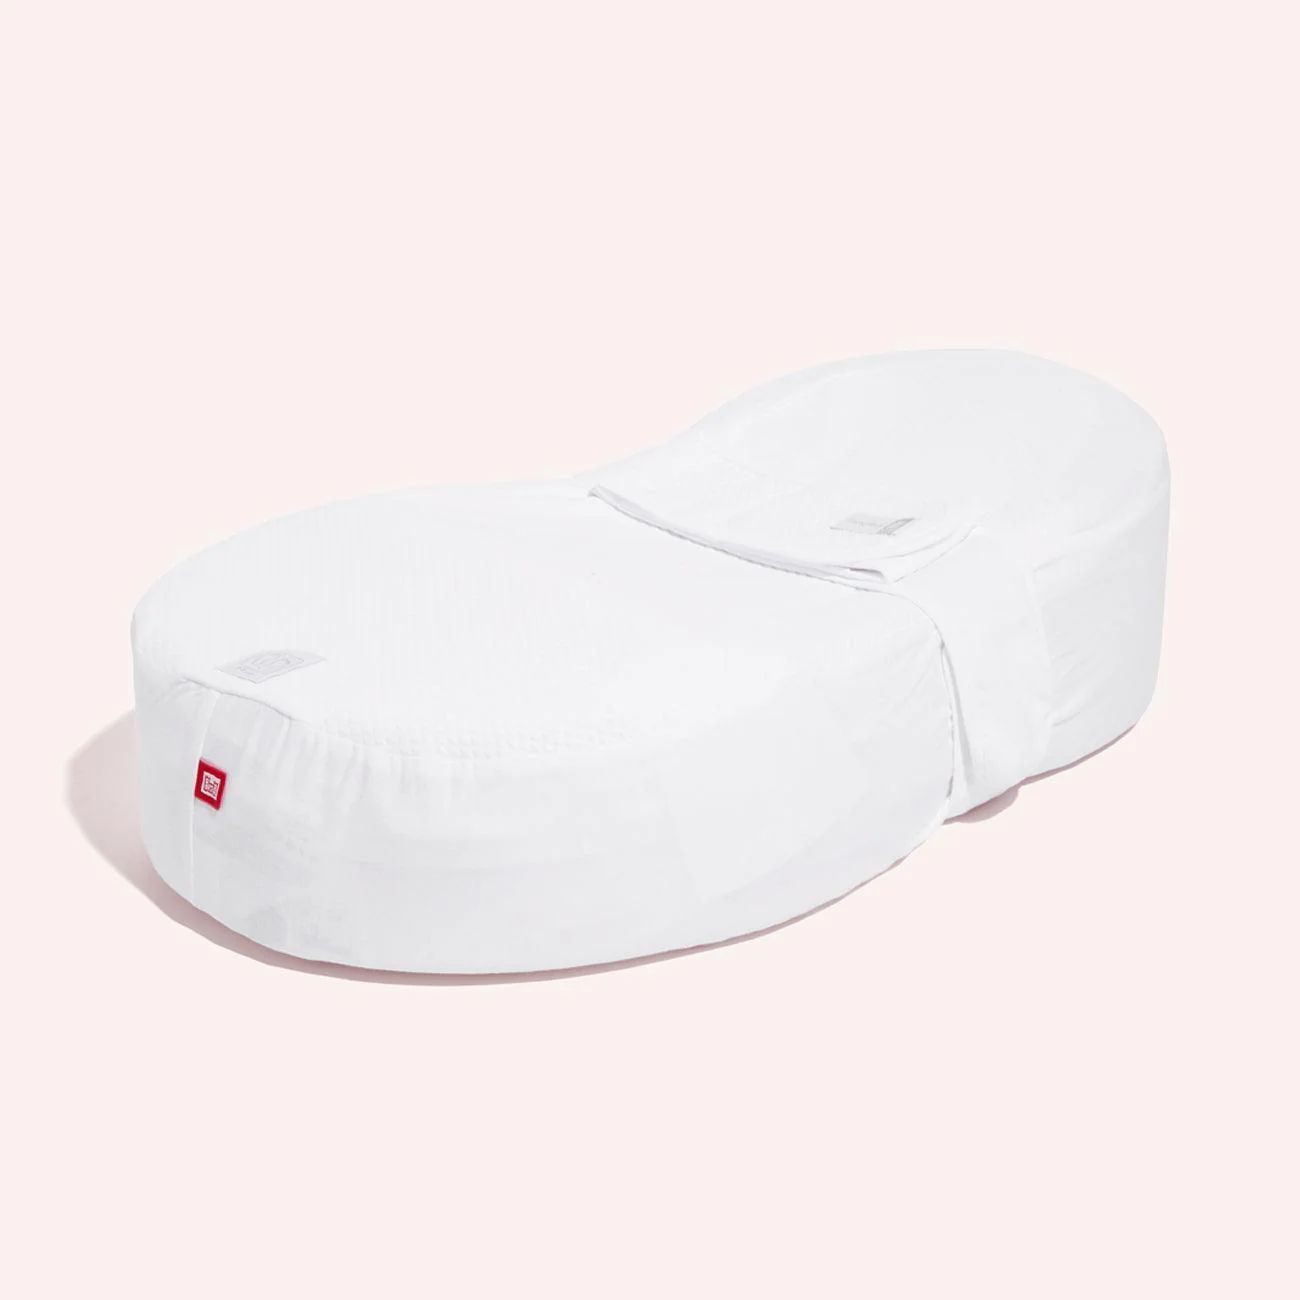 Cocoonababy Bassinet by Cocoonababy | the memo | The Memo (Australia & New Zealand)